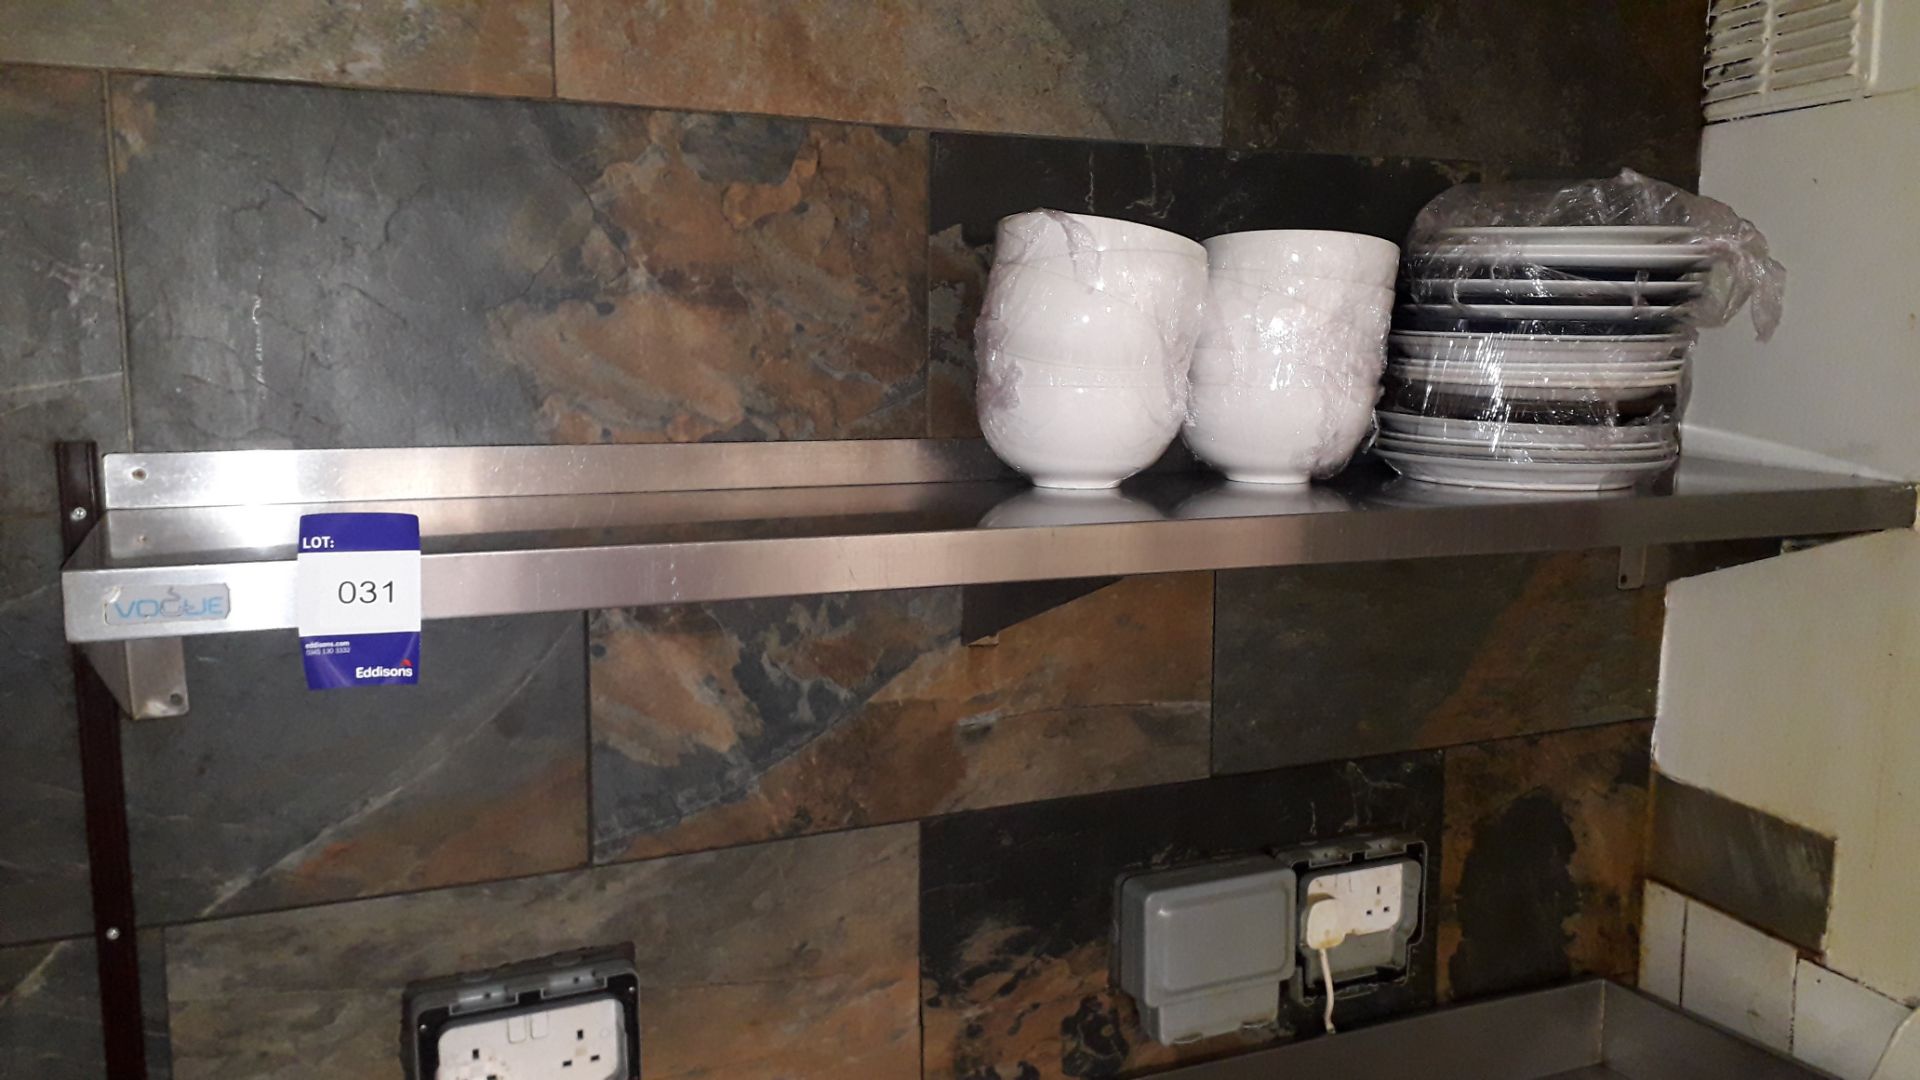 2 x Vogue Stainless Steel Wall Mount Shelves 1500 & 900mm